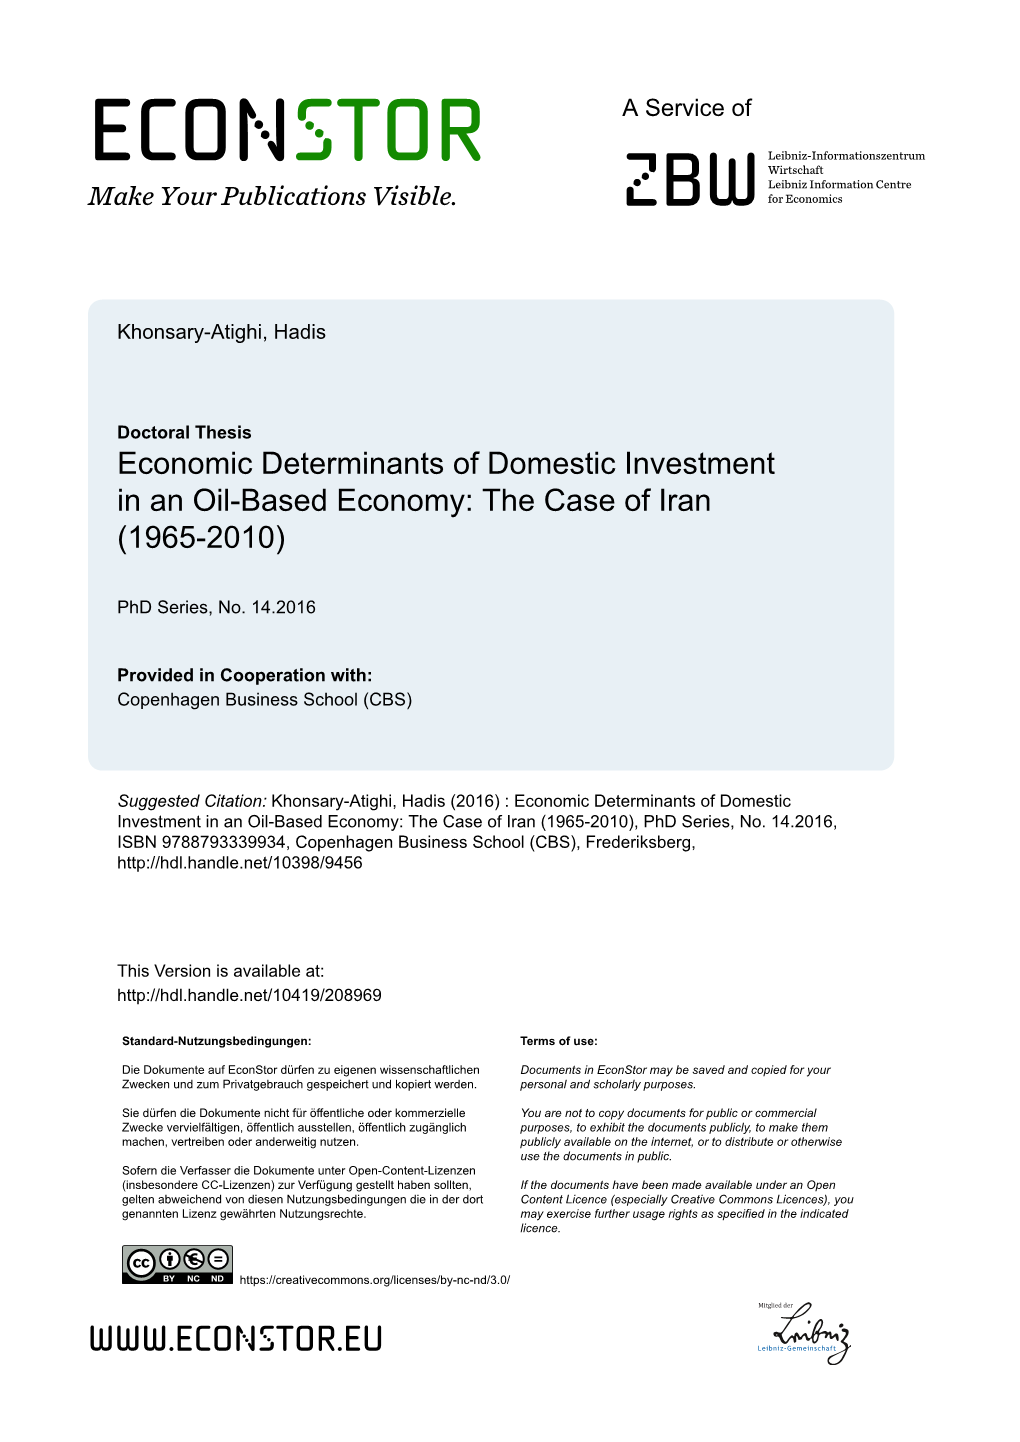 Economic Determinants of Domestic Investment in an Oil-Based Economy: the Case of Iran (1965-2010)